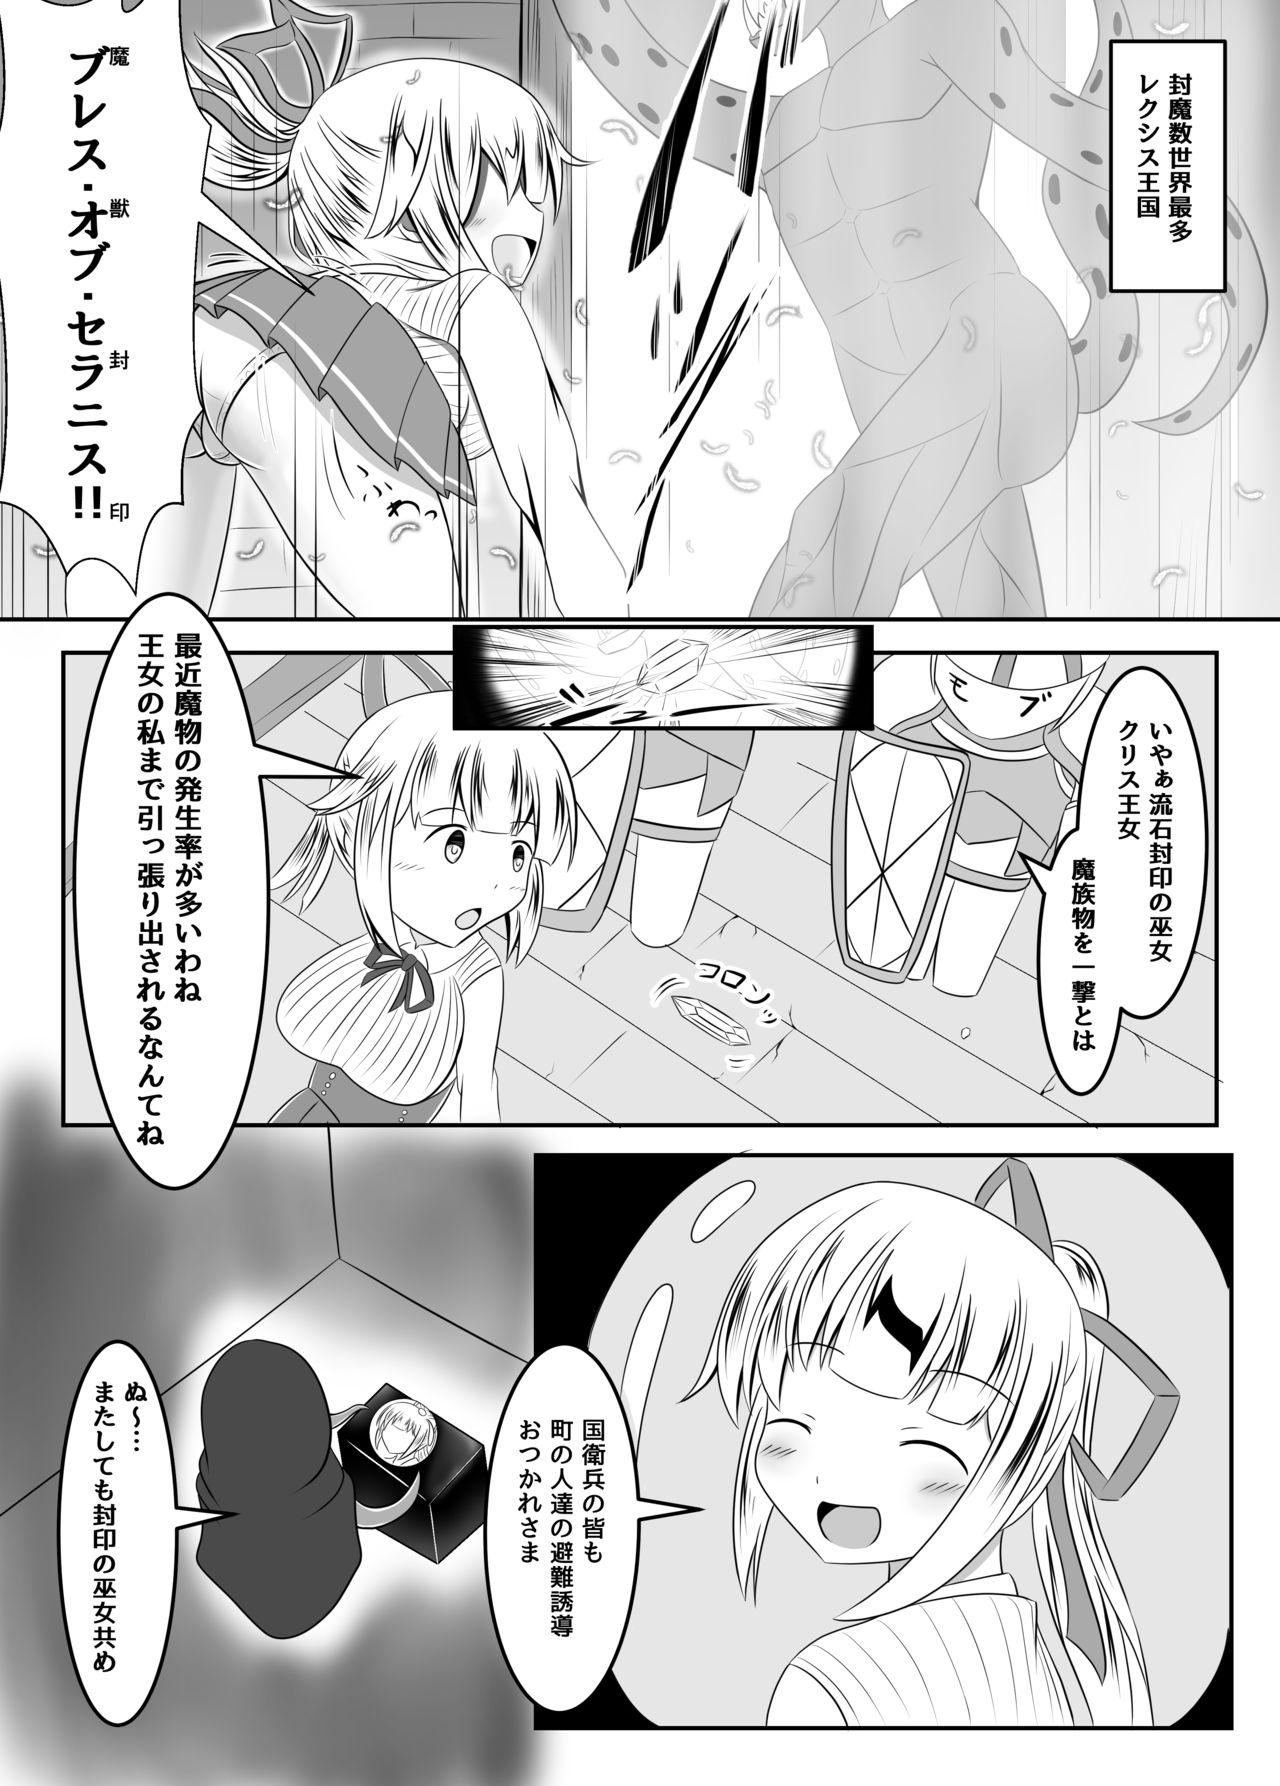 Stretching Fuuin no Miko - Original Awesome - Page 3